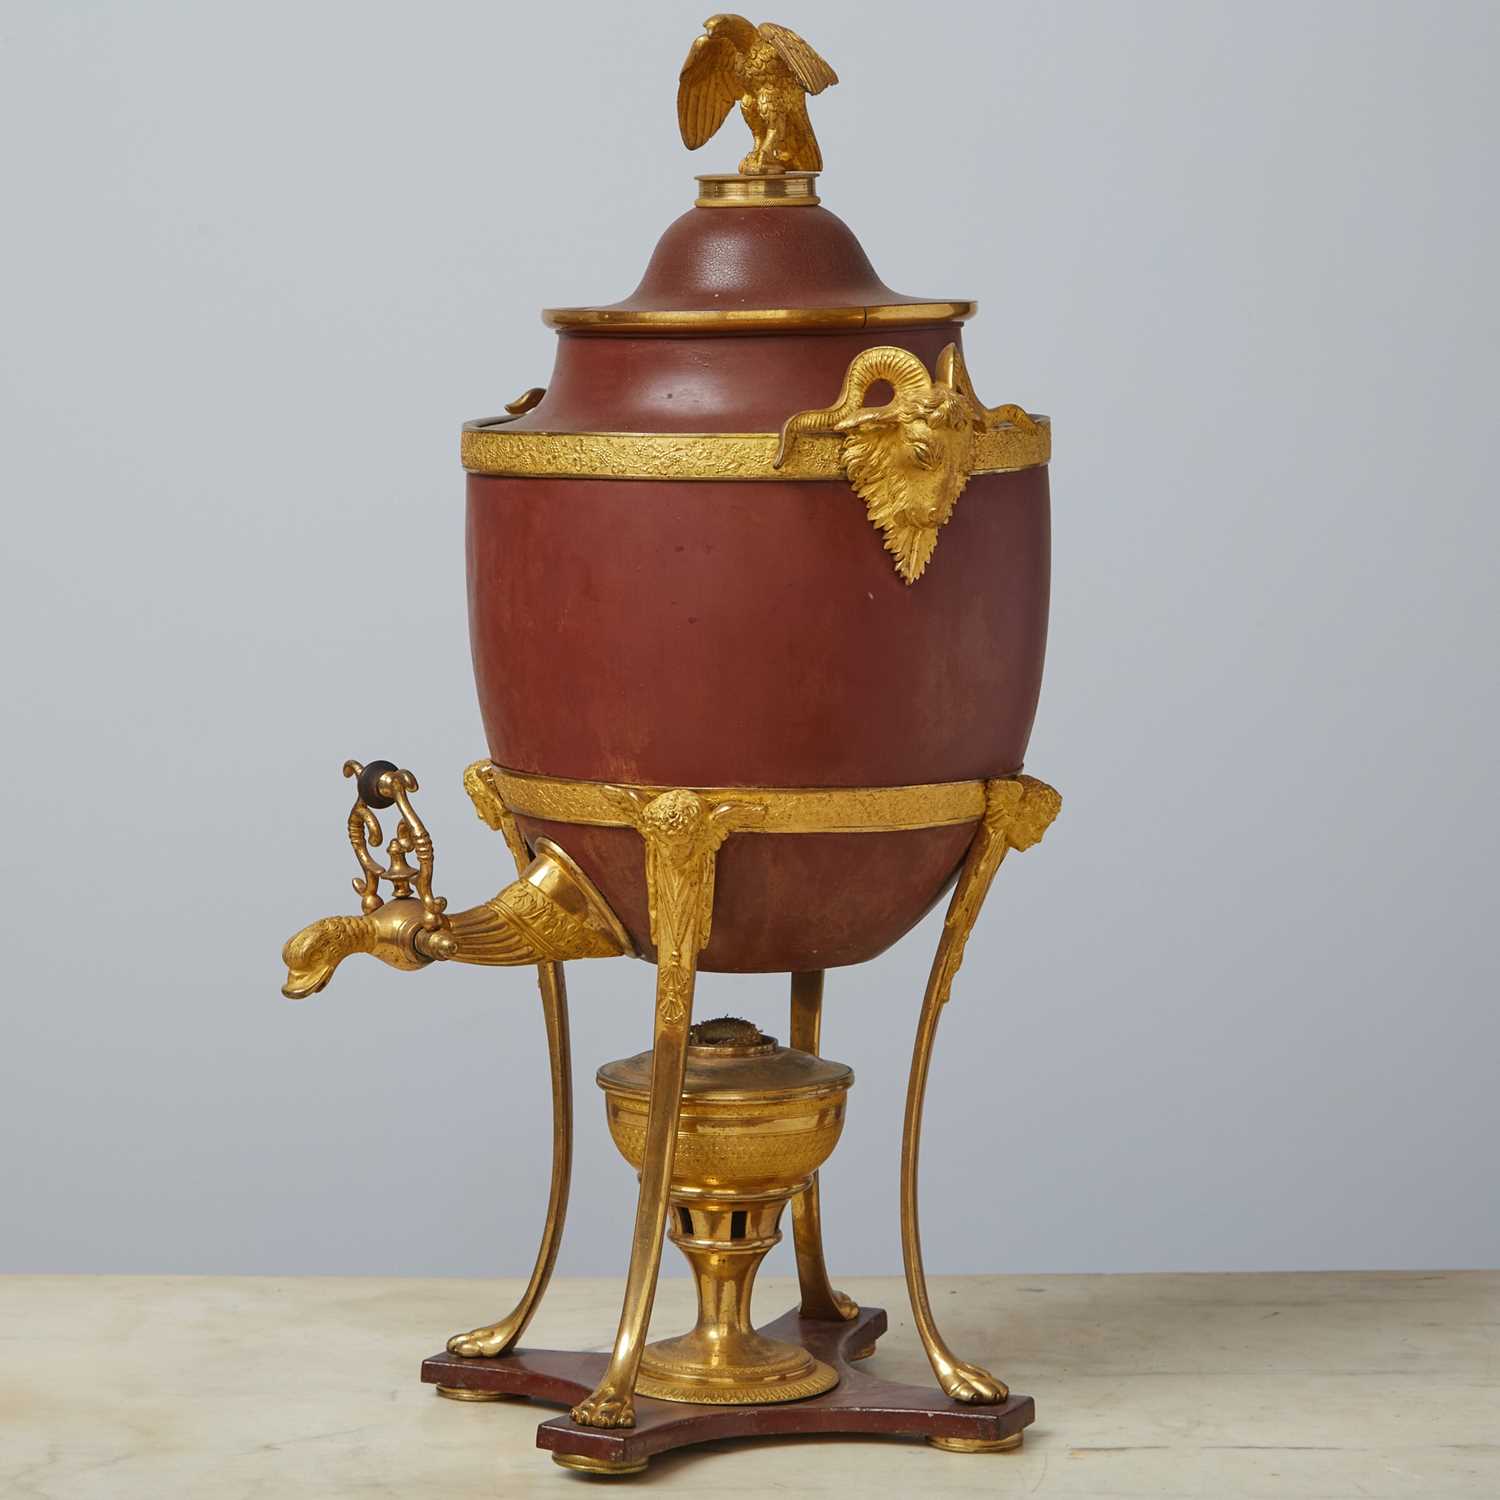 Lot 272 - Russian Empire Gilt-Bronze and Painted Tôle Samovar